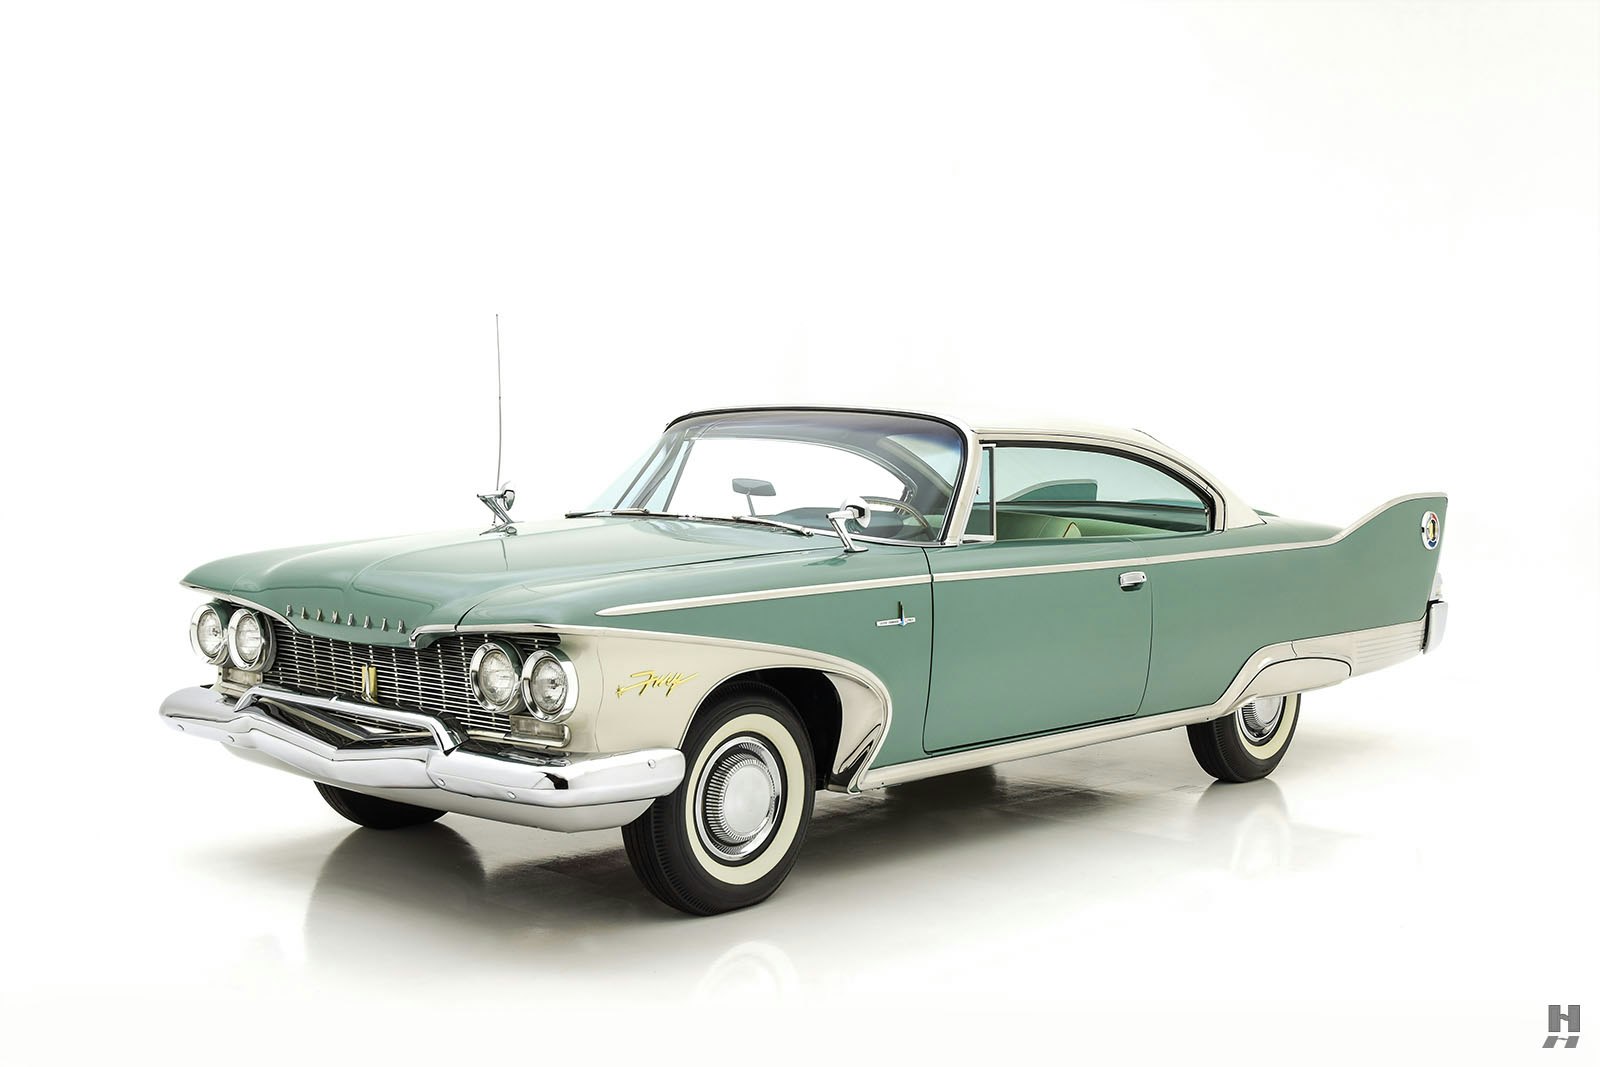 1960 Plymouth Fury 2dr Hardtop Coupe Courtesy of Hyman Ltd.